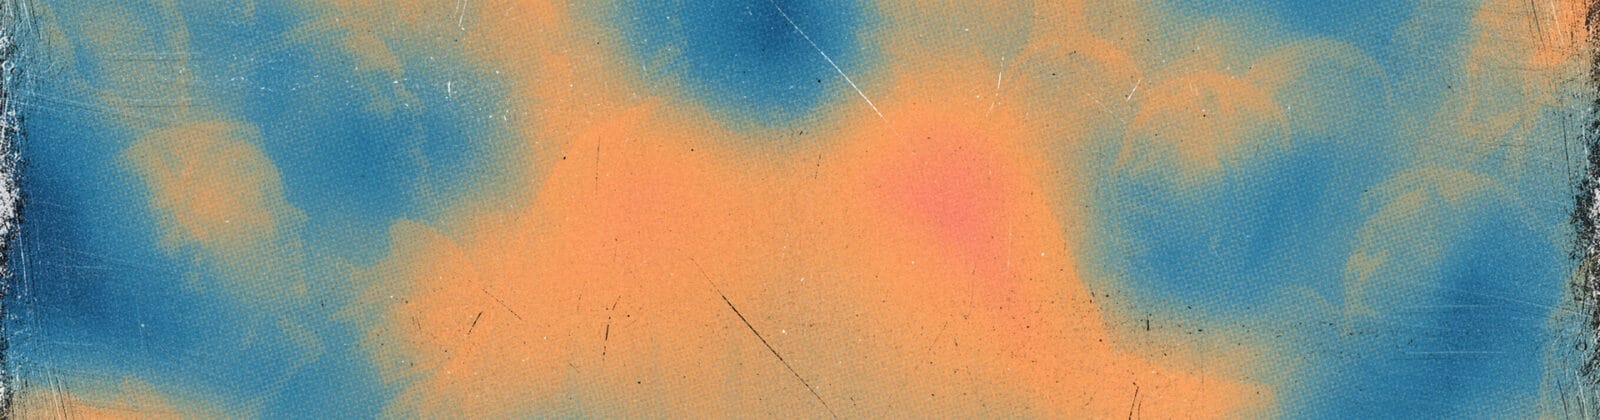 Abstract orange and blue textured background with a distressed vintage look, perfect for an Easter sermon theme.